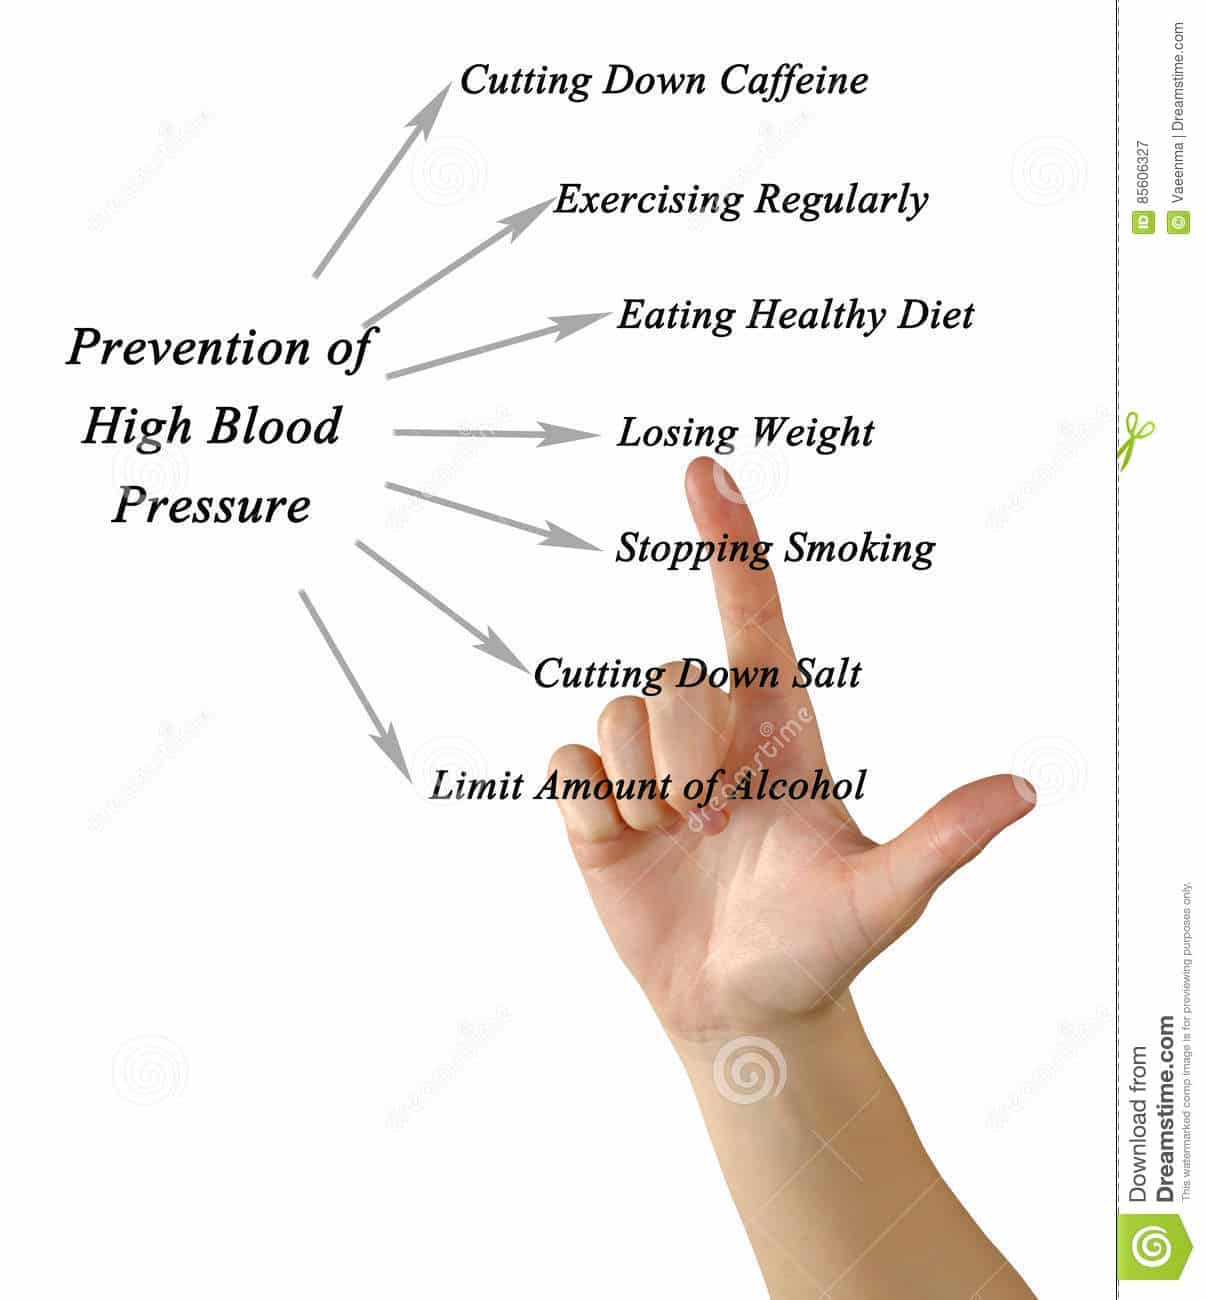 Preventioning High Blood Pressure Stock Image